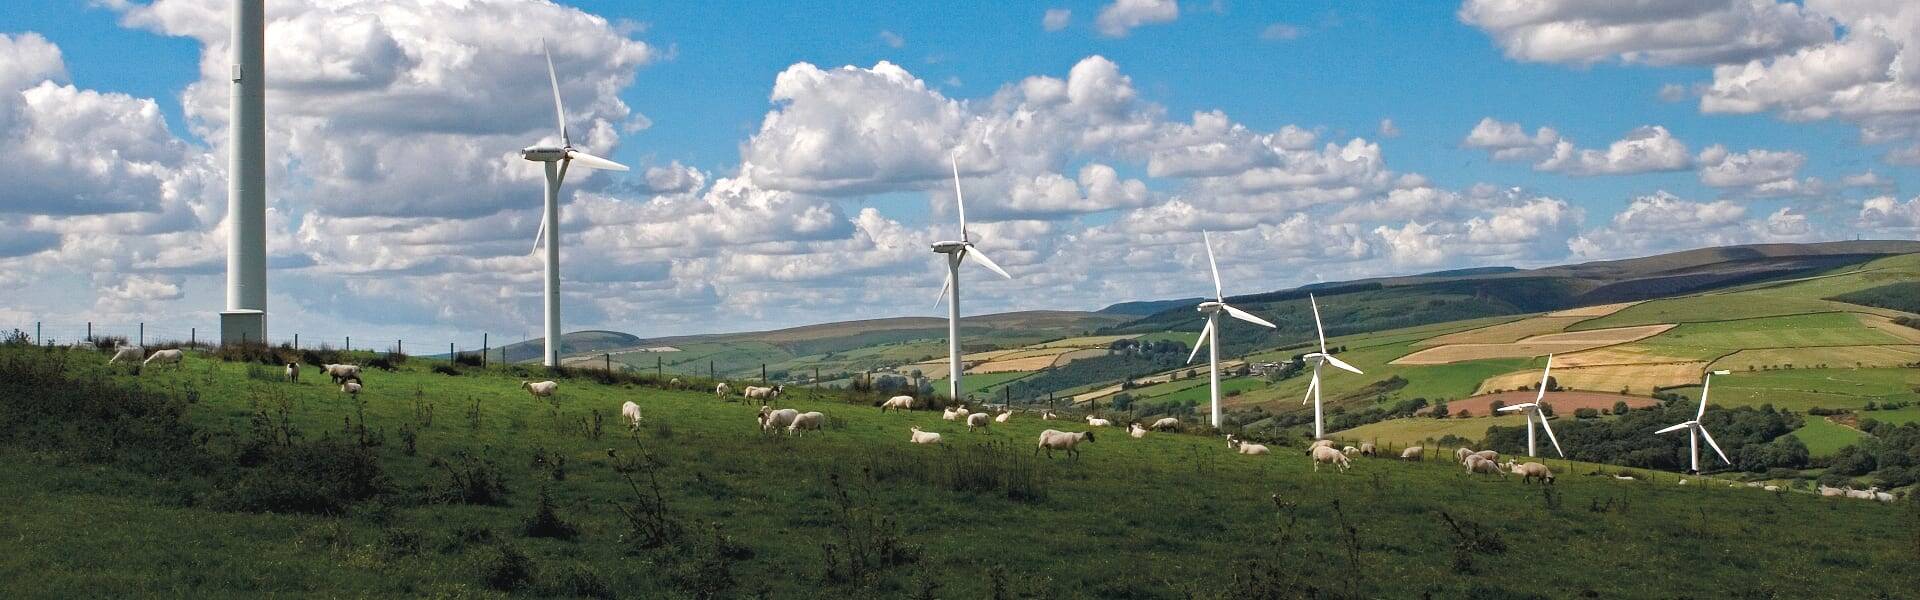 Coutinho hails ‘key role’ for onshore wind as ban is axed